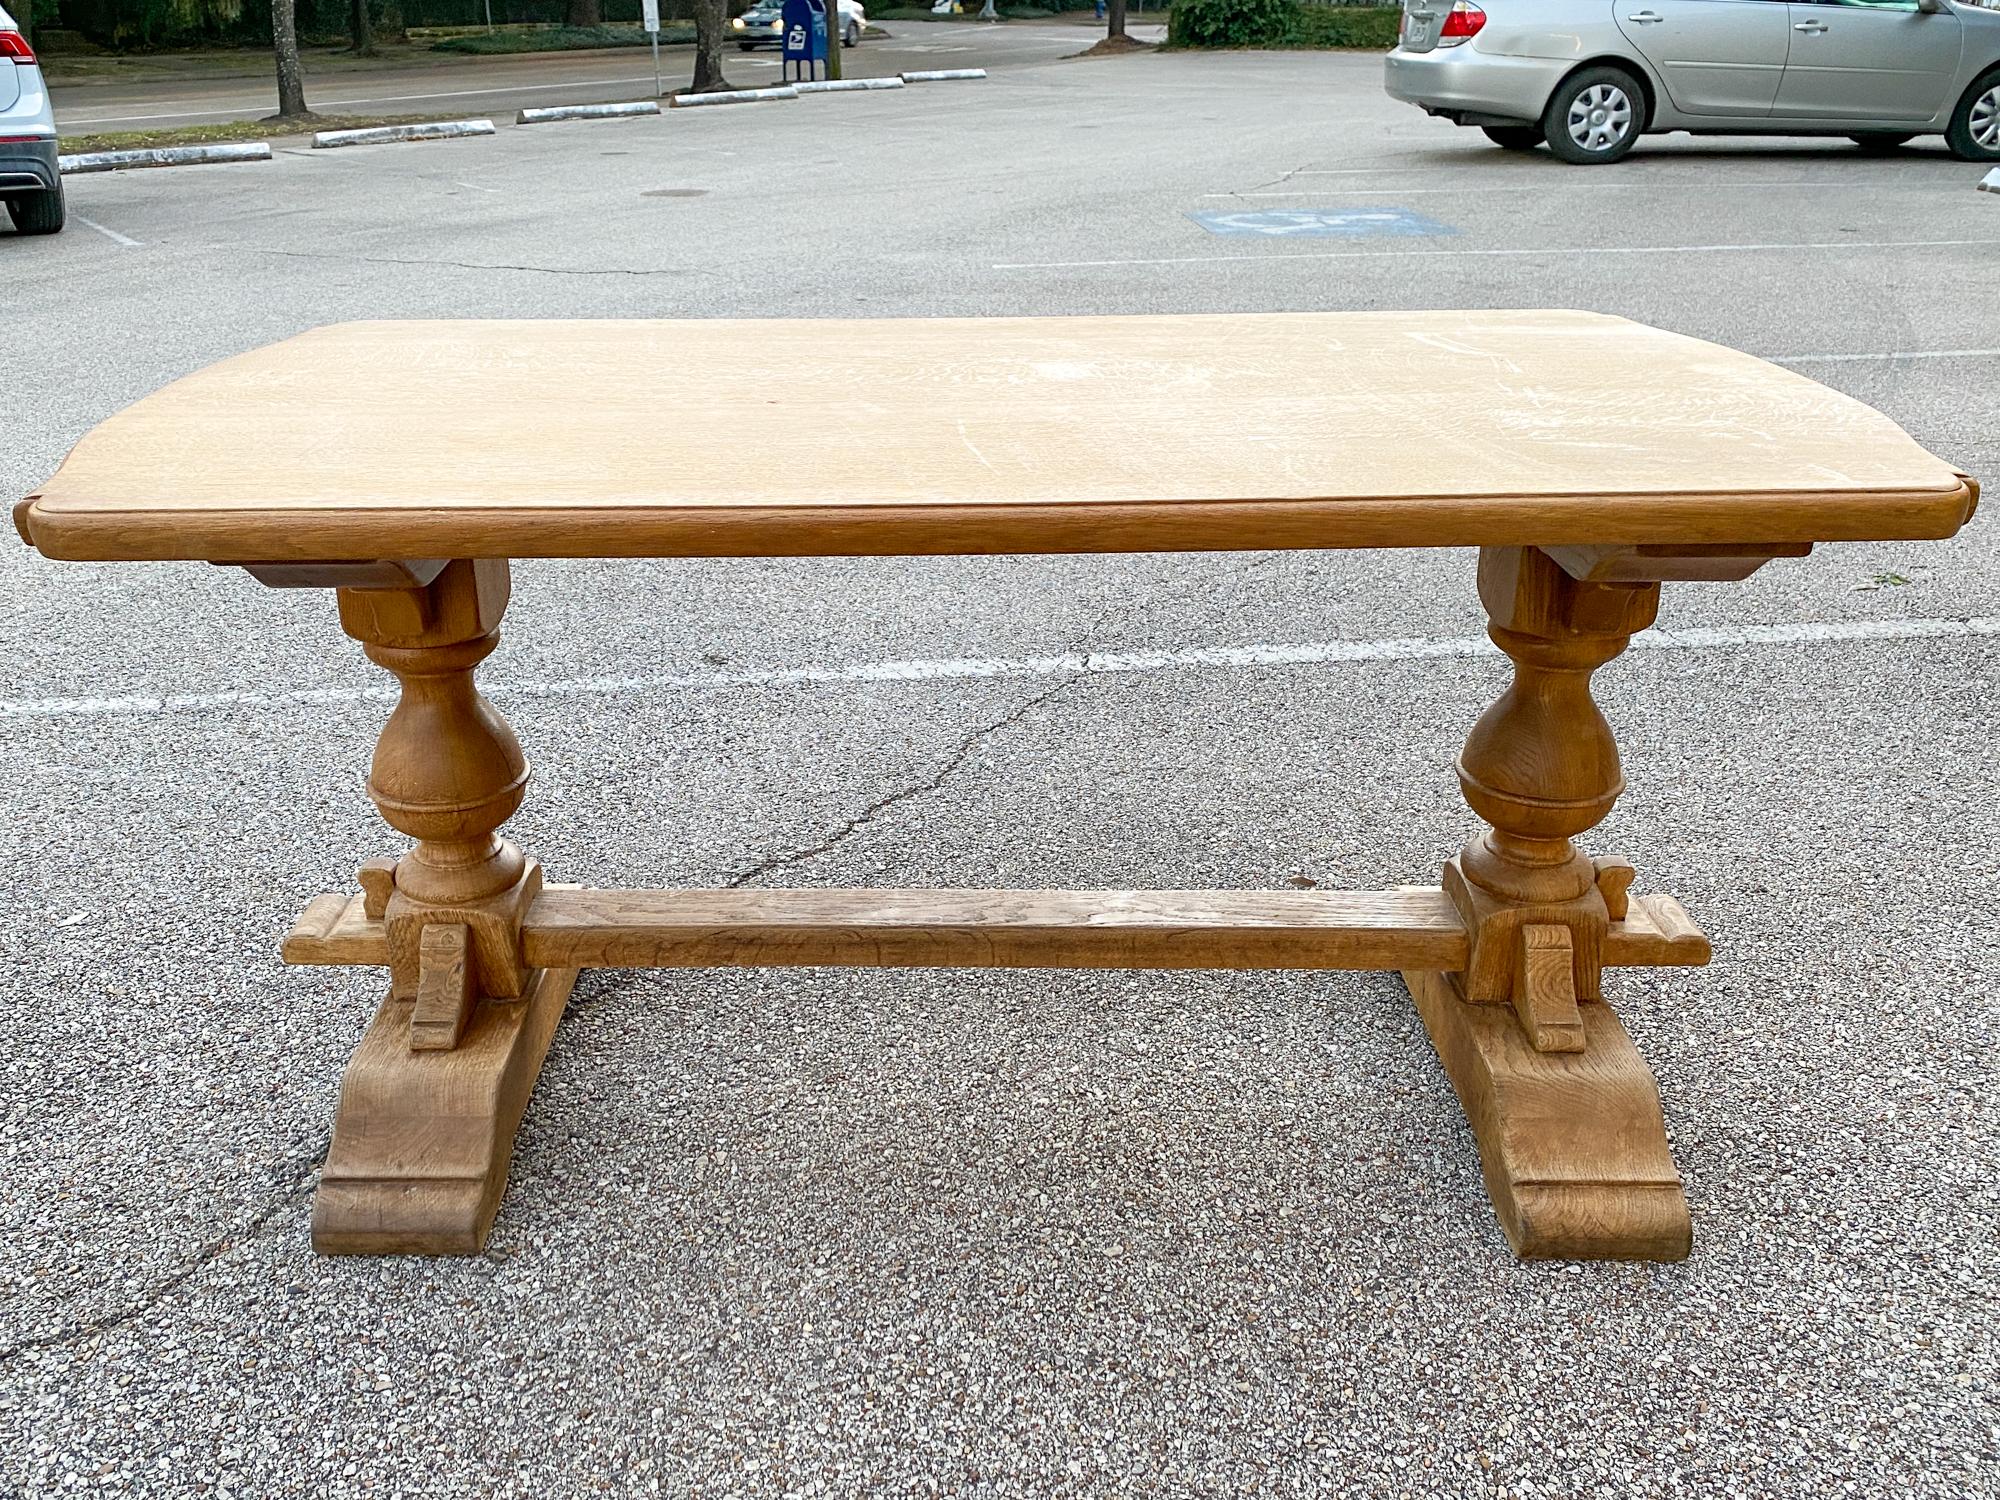 This vintage French Oak table features a double-pedestal leg design with a stretcher and chunky turned details. The top has a decorative edge and is an ideal size for use as a desk. The top can be secured to the base via the steel rails that have